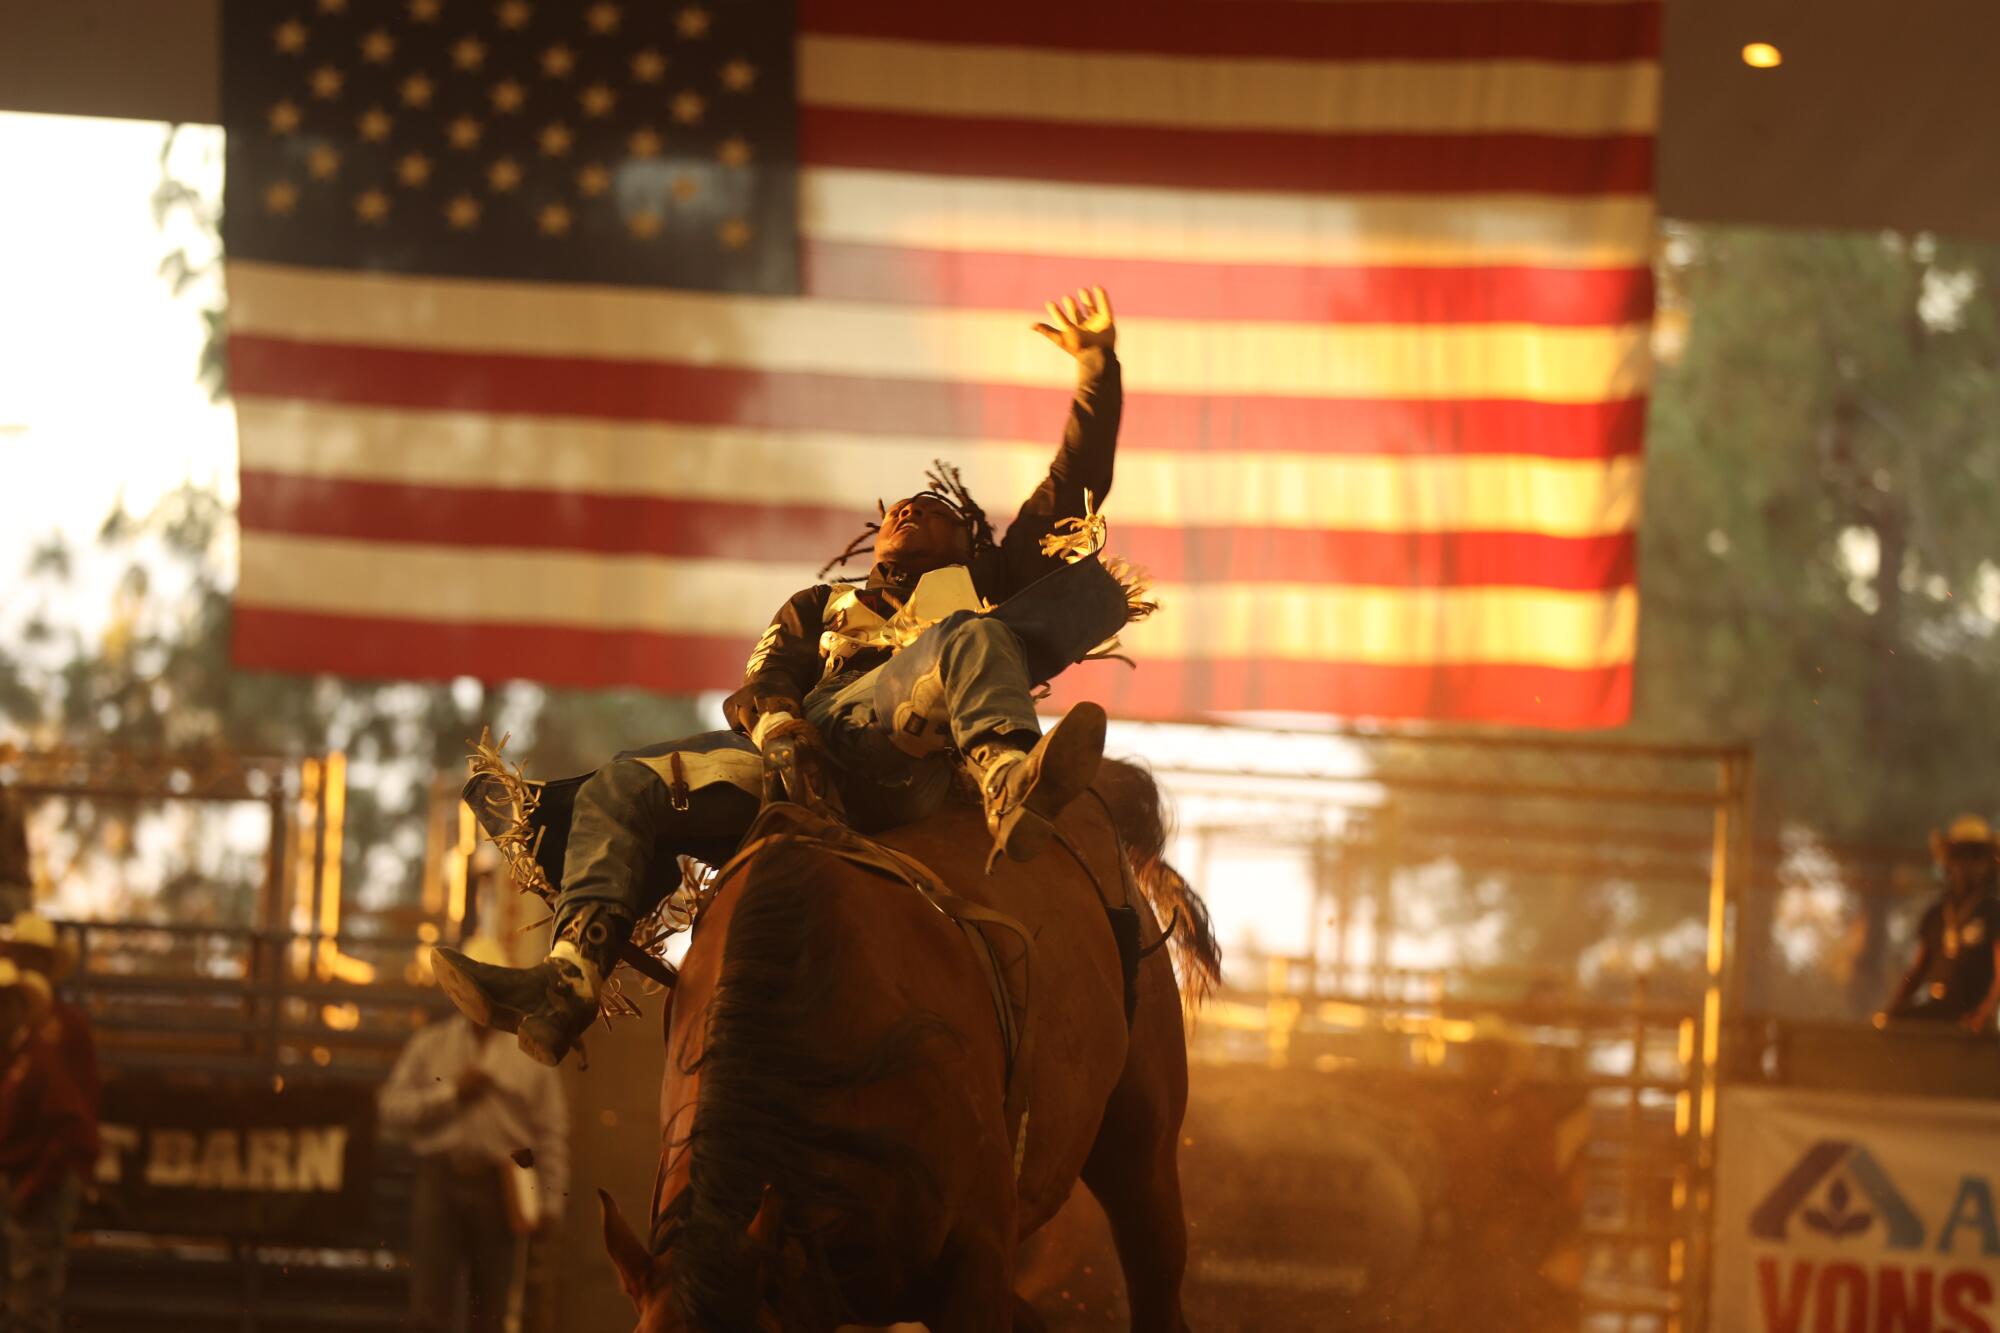 A man rides a horse, with a giant American flag hanging behind him.